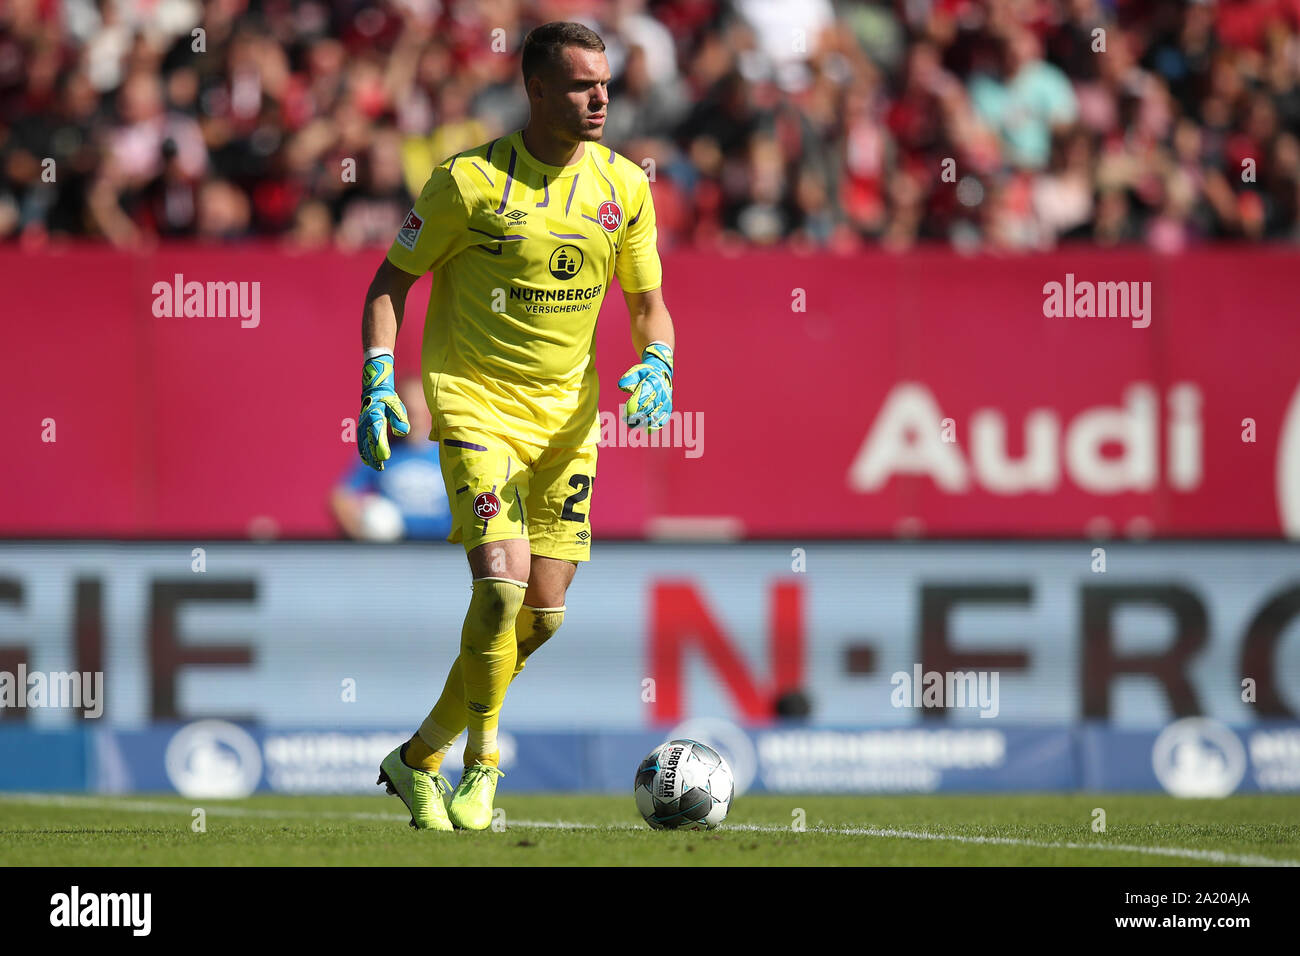 Nuremberg, Germany. 21st Sep, 2019. Soccer: 2nd Bundesliga, 1st FC Nuremberg - Karlsruher SC, 7th matchday in Max Morlock Stadium. Nuremberg goalkeeper Christian Mathenia. Credit: Daniel Karmann/dpa - IMPORTANT NOTE: In accordance with the requirements of the DFL Deutsche Fußball Liga or the DFB Deutscher Fußball-Bund, it is prohibited to use or have used photographs taken in the stadium and/or the match in the form of sequence images and/or video-like photo sequences./dpa/Alamy Live News Stock Photo